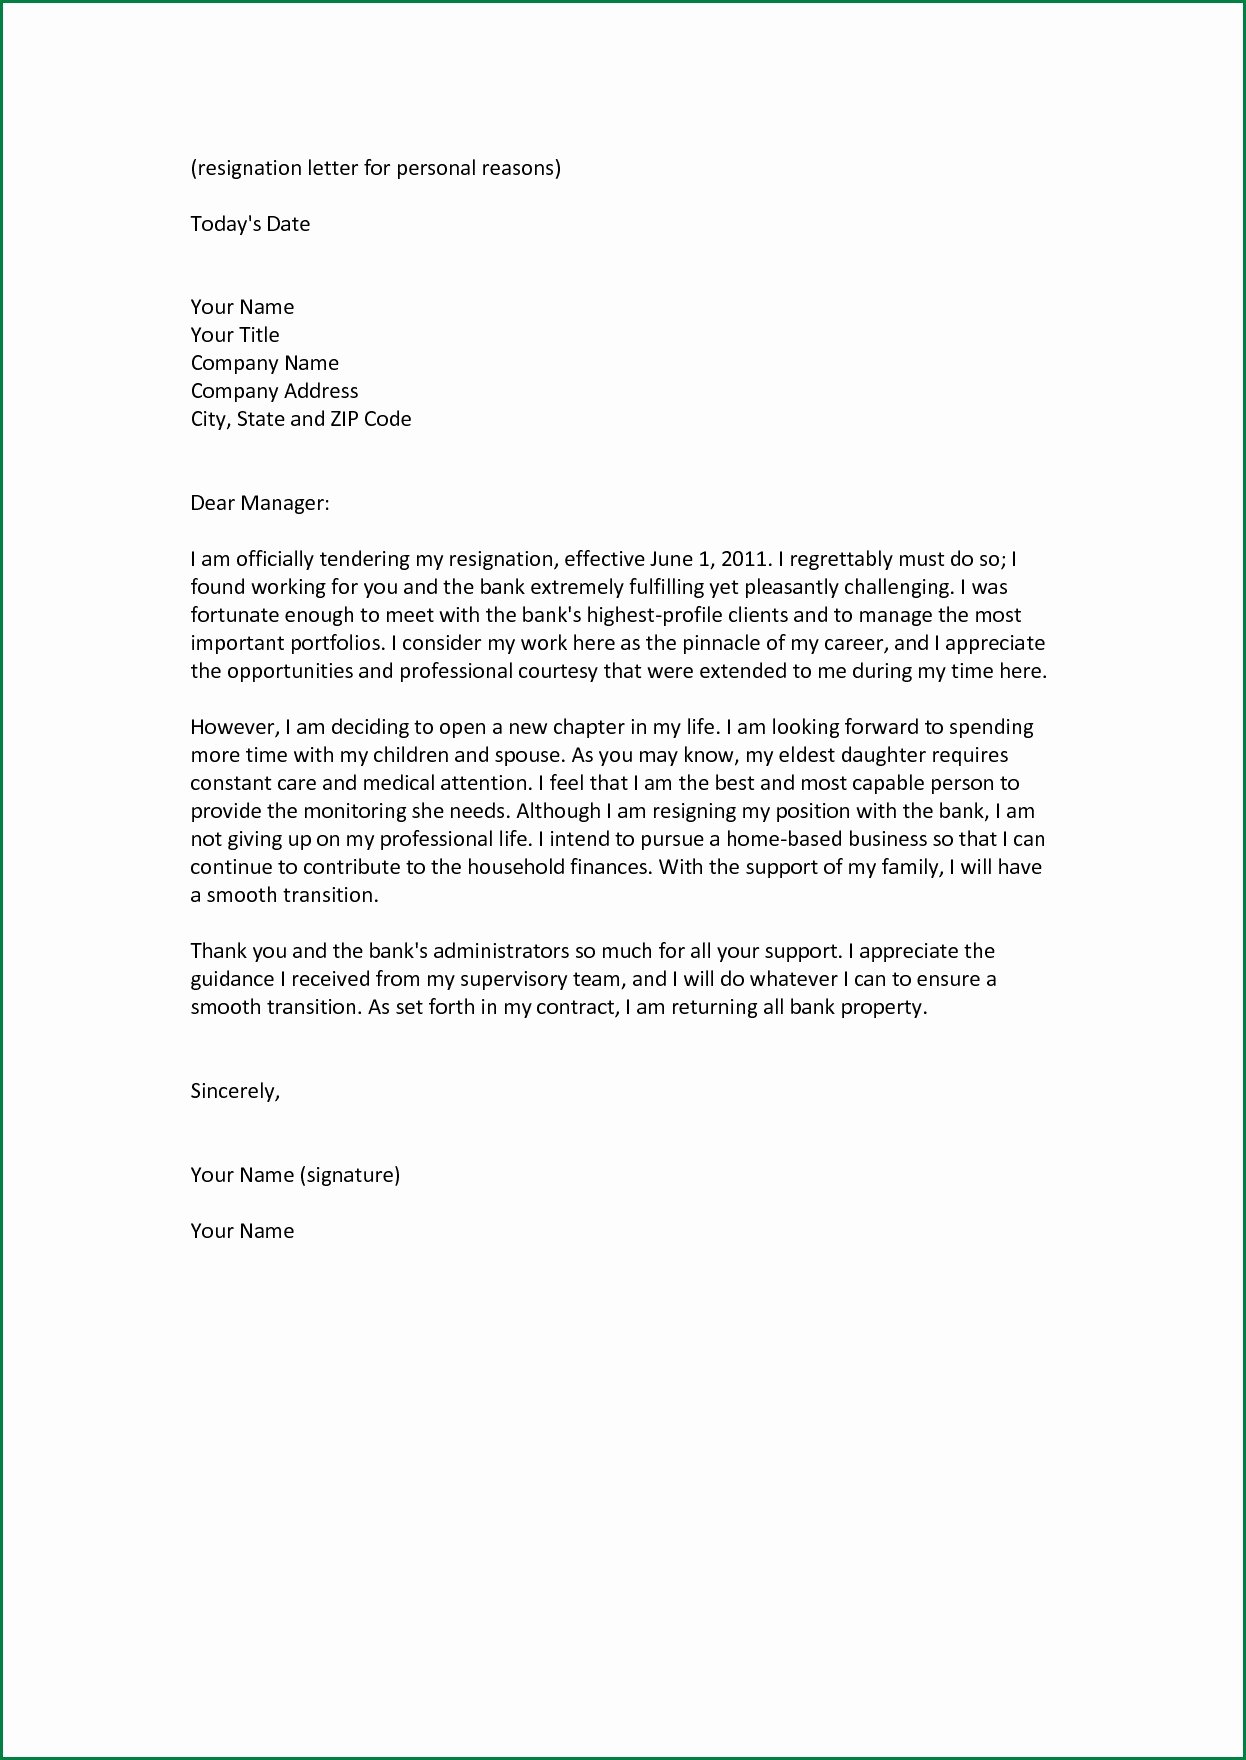 Letter format On Word Lovely New Simple Resignation Letter format In Word File